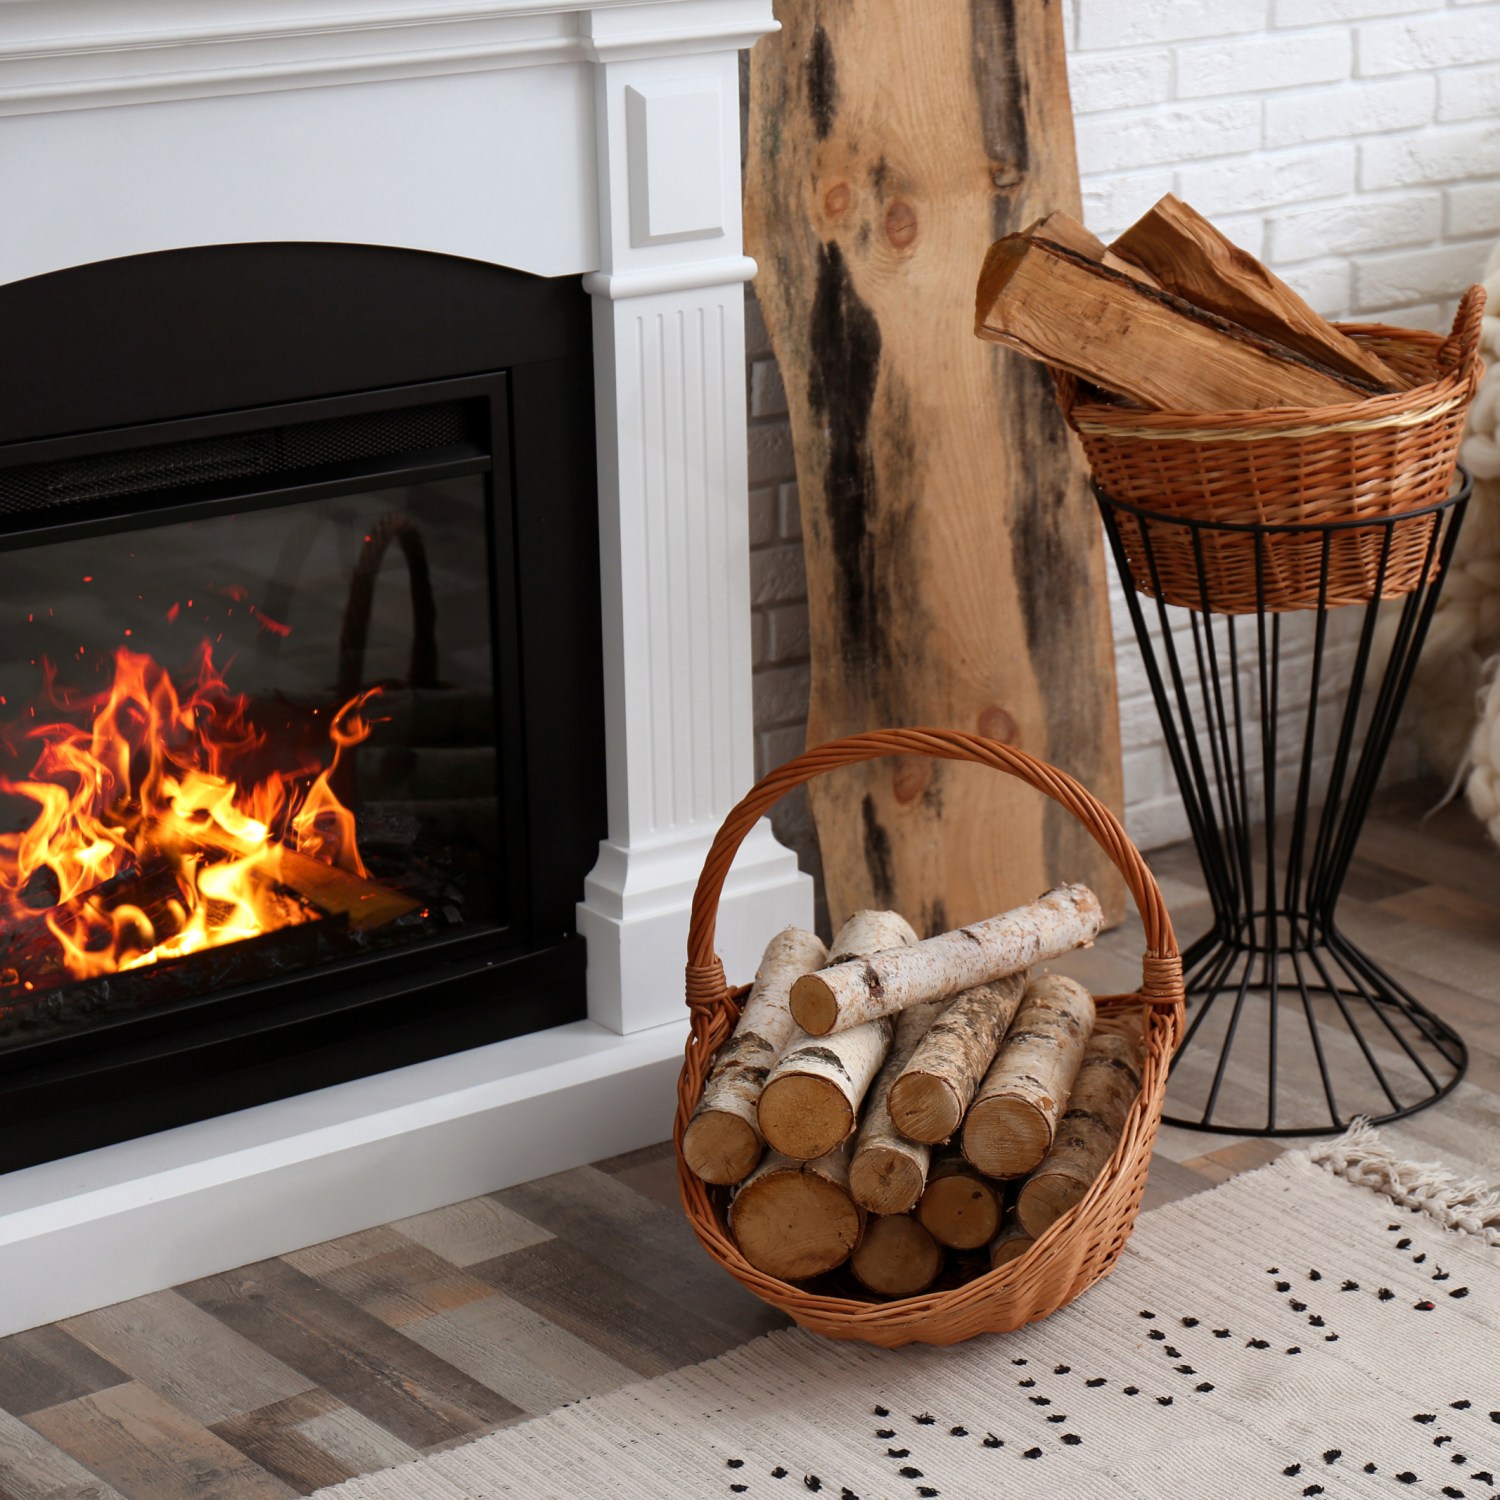 Natural light in cozy living room with wicker baskets with firewood and burning fireplace.